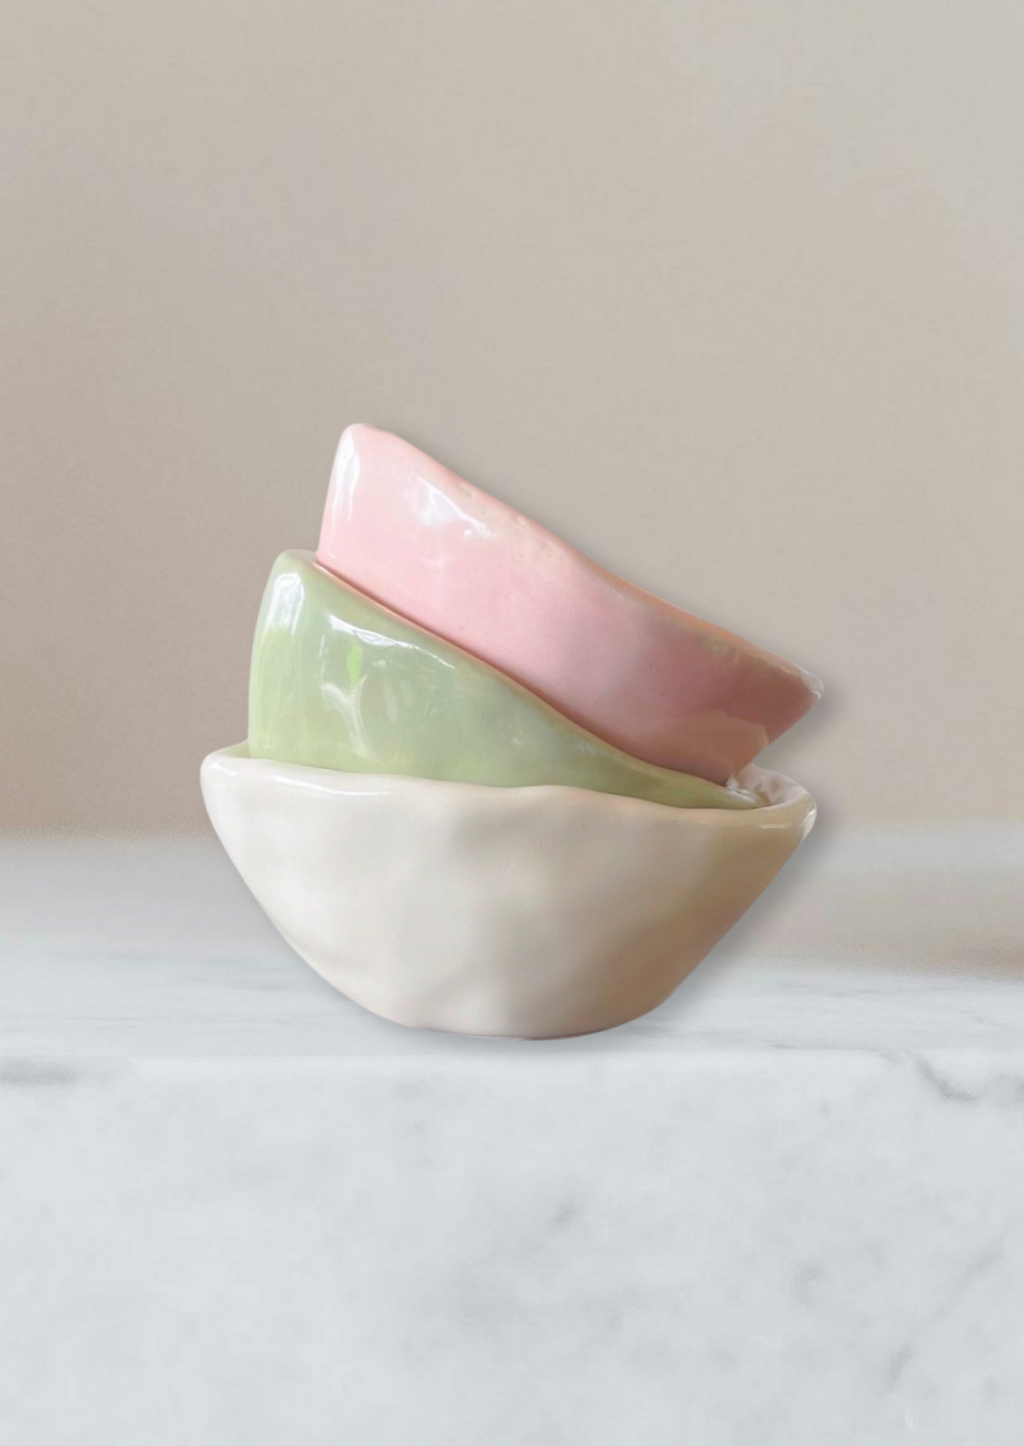 <h3>Maddison Bowl - 3 Colours</h3> <p>The Maddison Bowl is a range of bowls made for us here in New Zealand. This one is the smallest in the collection and comes in three soft shades, Snow, Petal and Pale Sage.</p> <p>As bowls are hand made, shades and shapes may vary. This adds to their uniqueness&nbsp;</p>